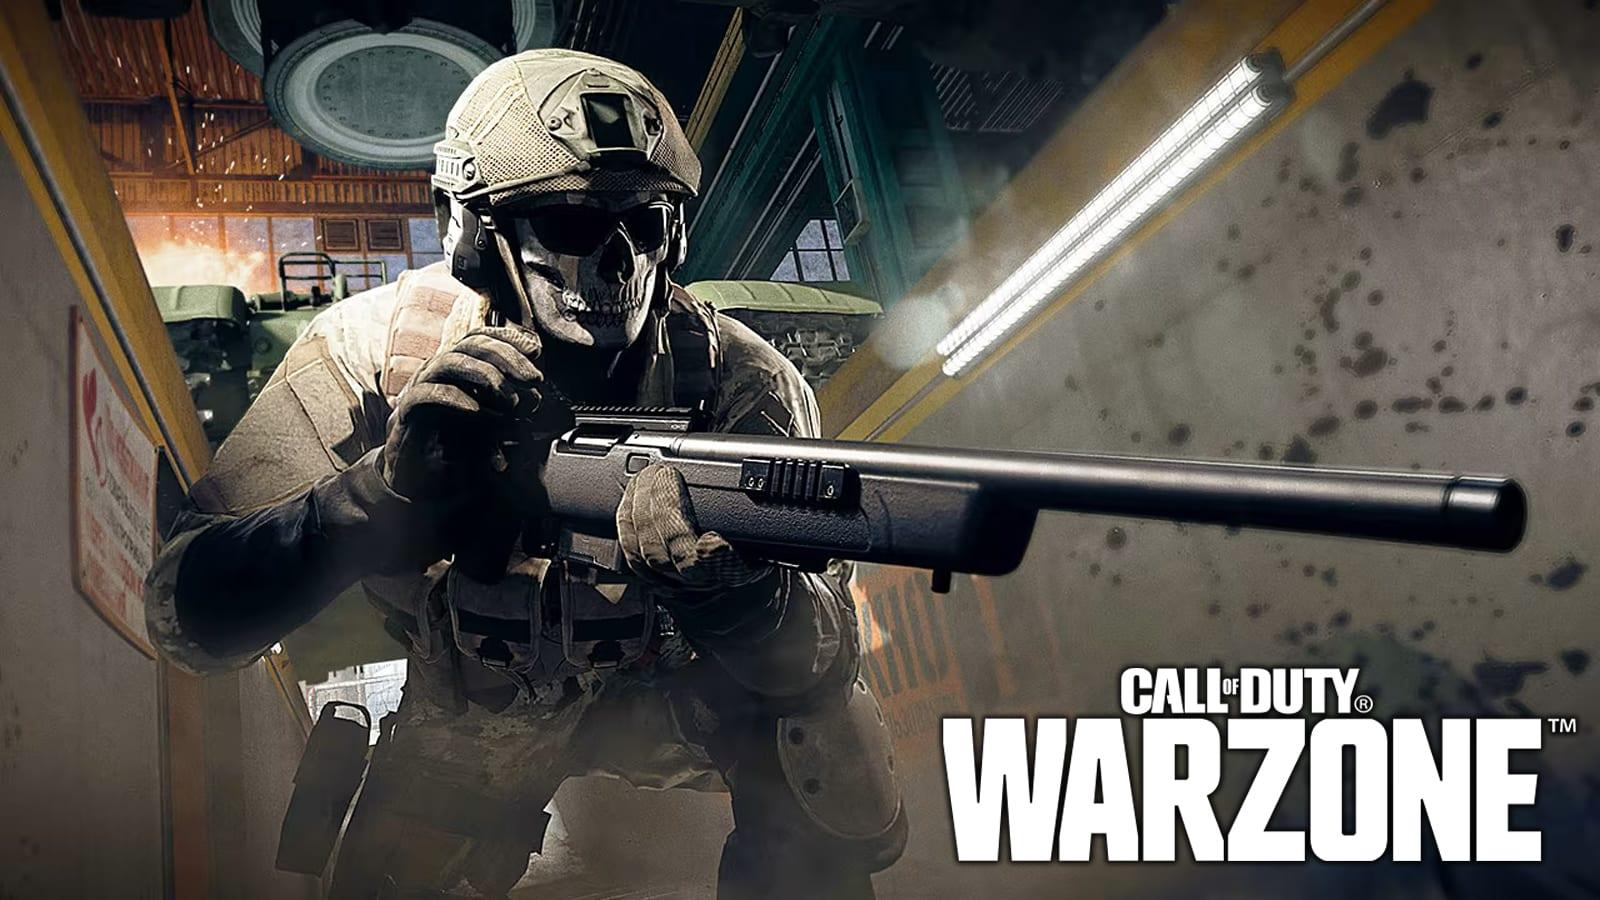 An image of Call of Duty Warzone.